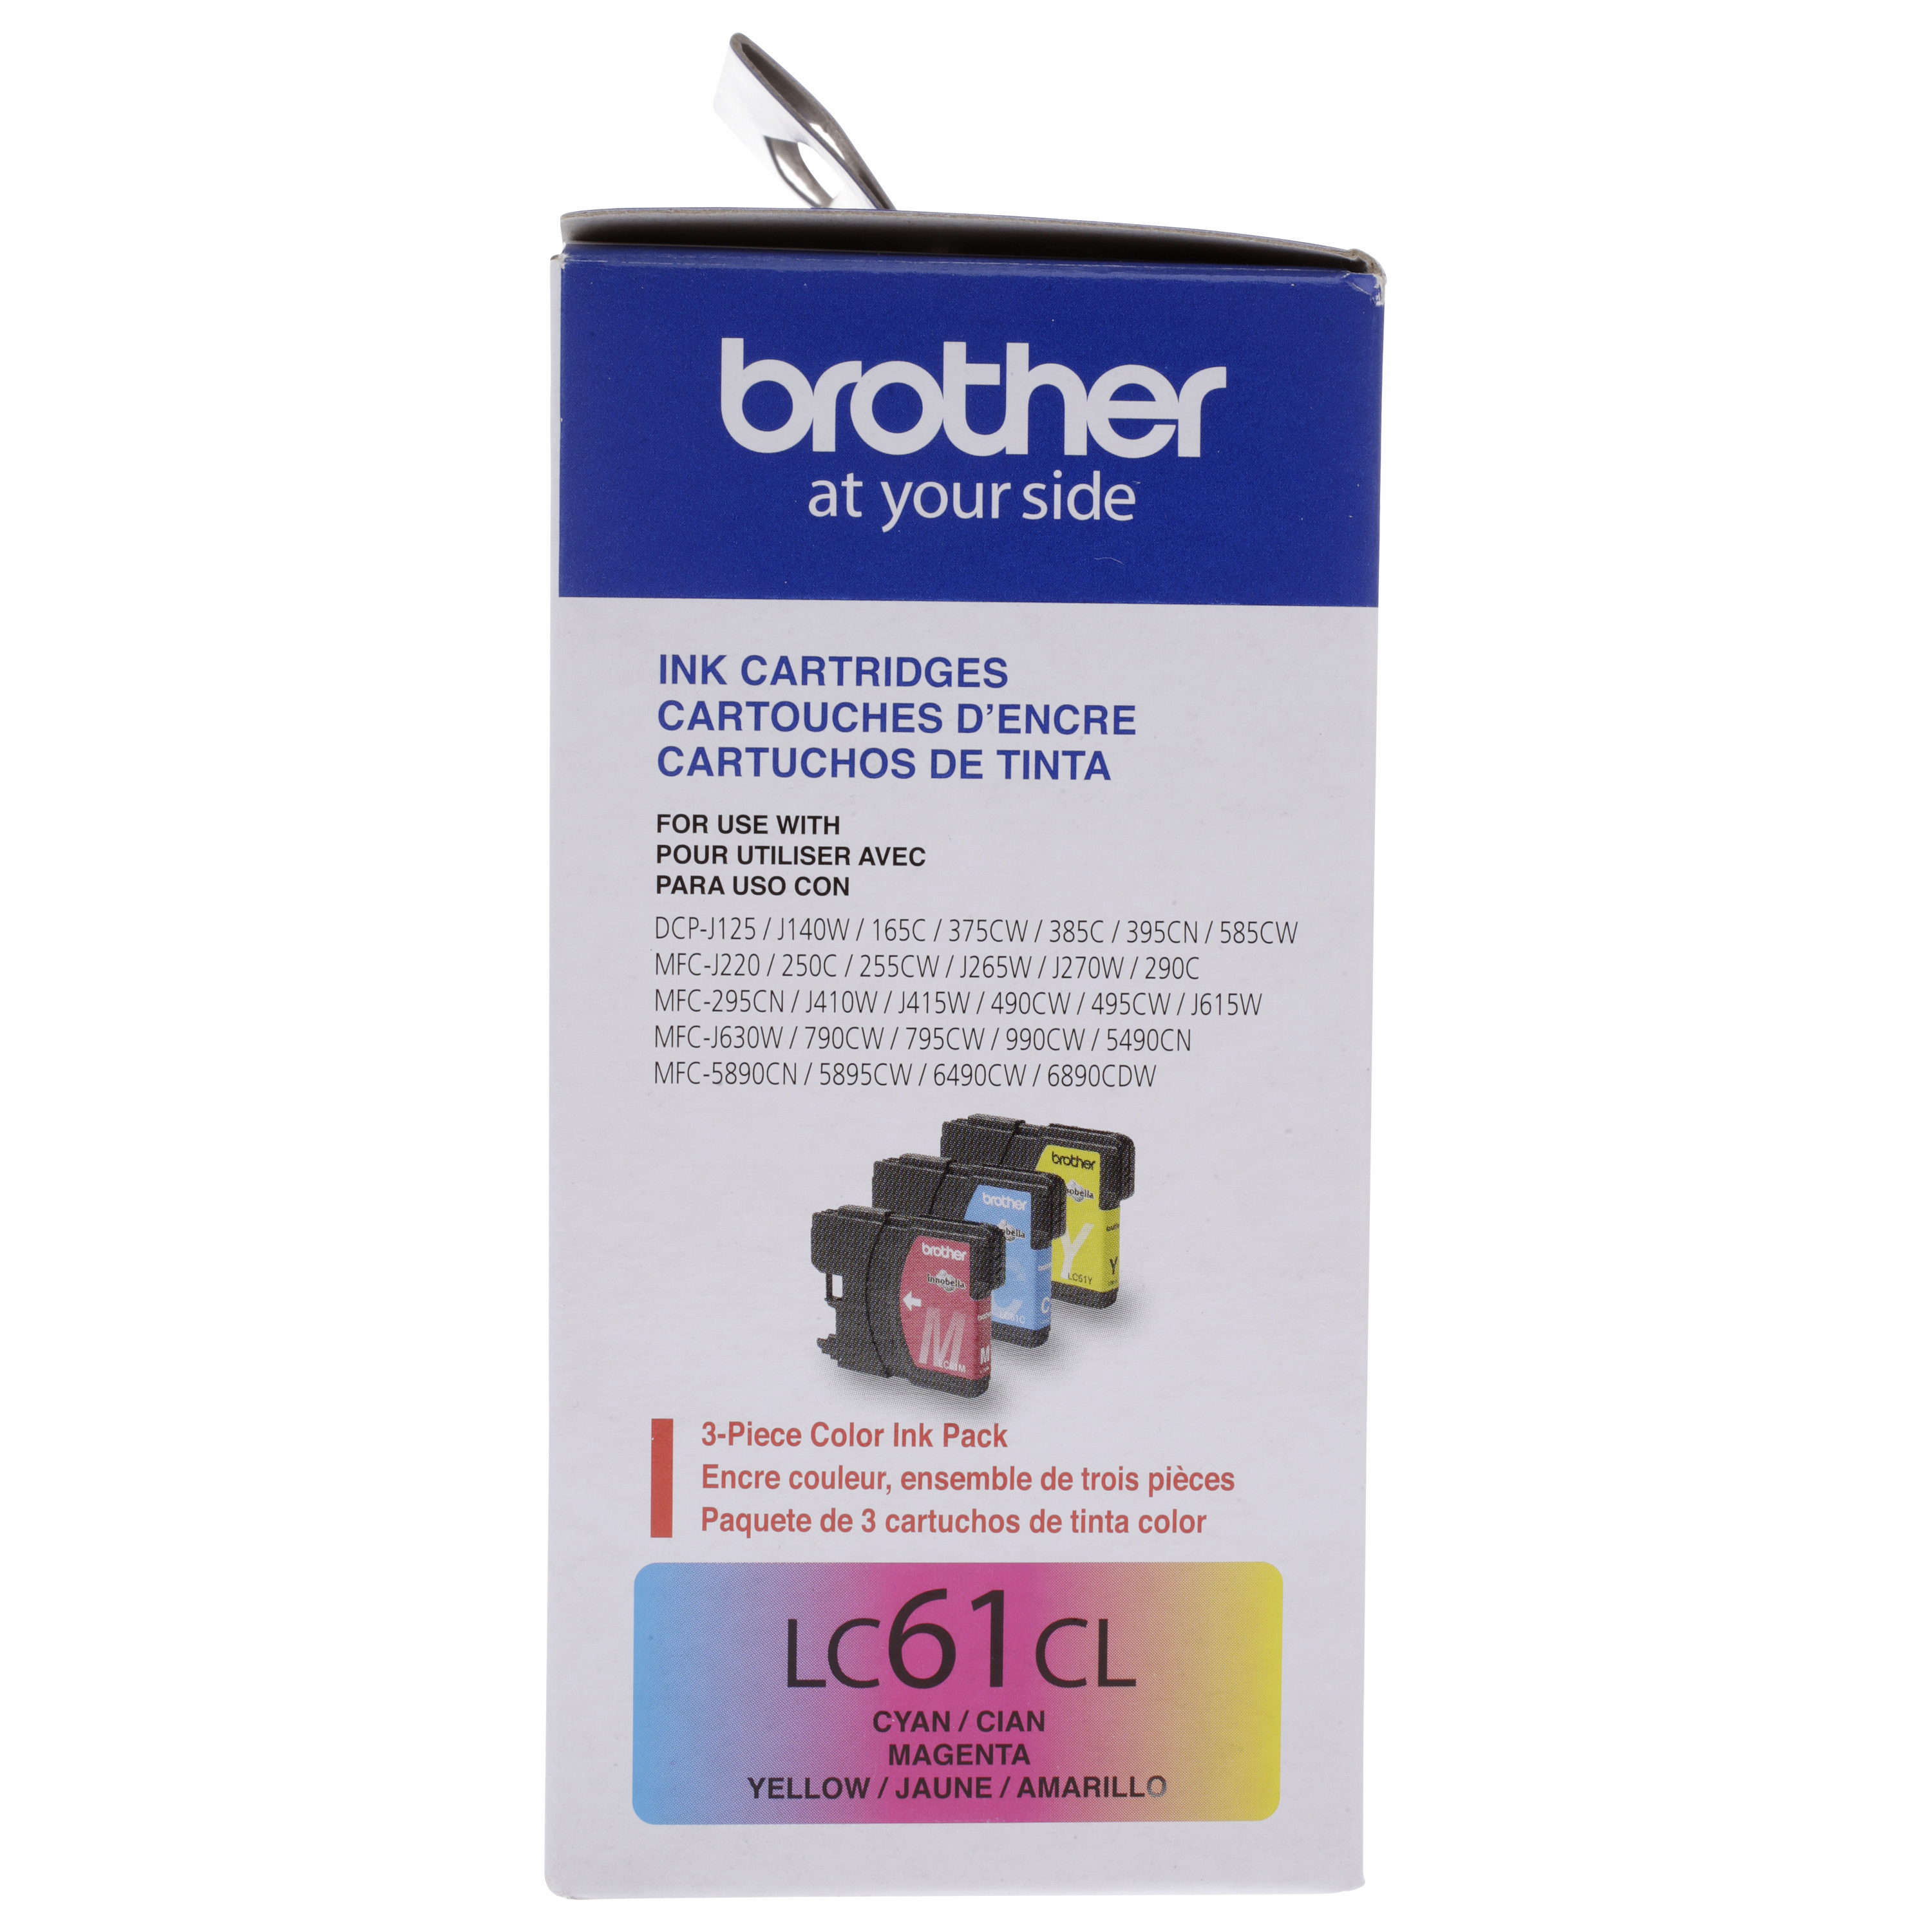 Brother Genuine Standard-yield Color Printer Ink Cartridges, LC613PKW - image 4 of 6